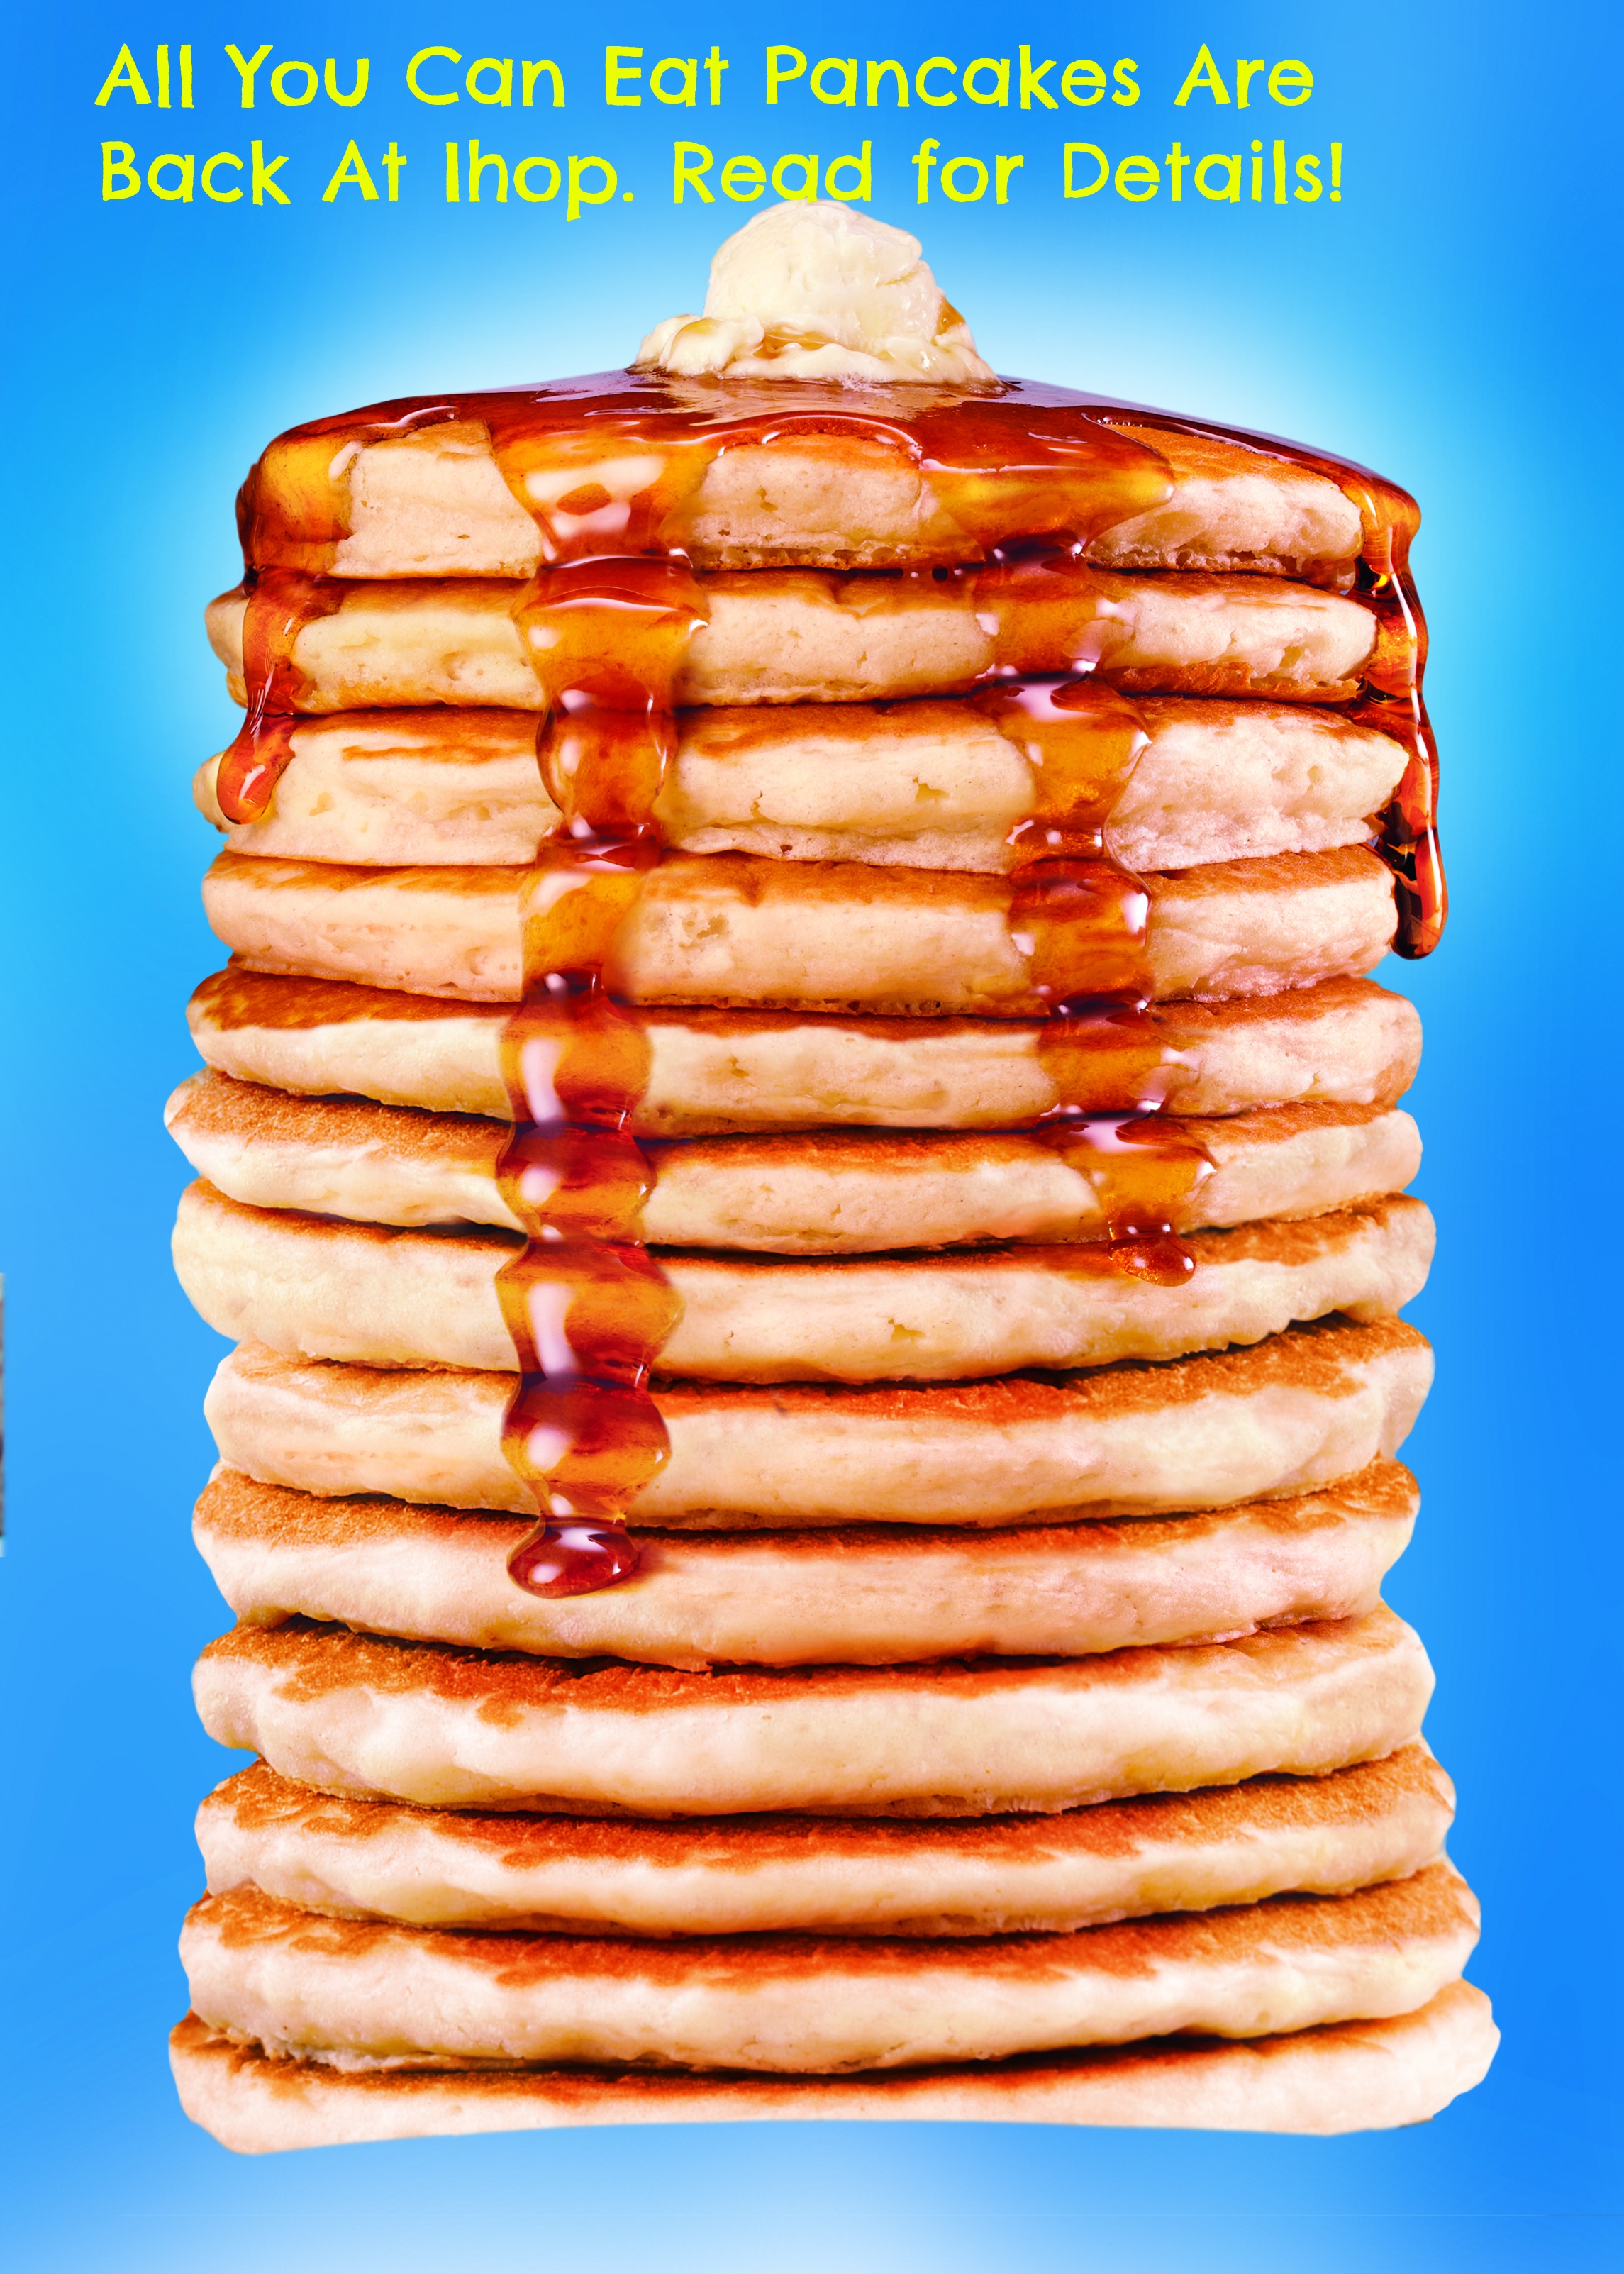 All You Can Eat Pancakes are Back at Ihop